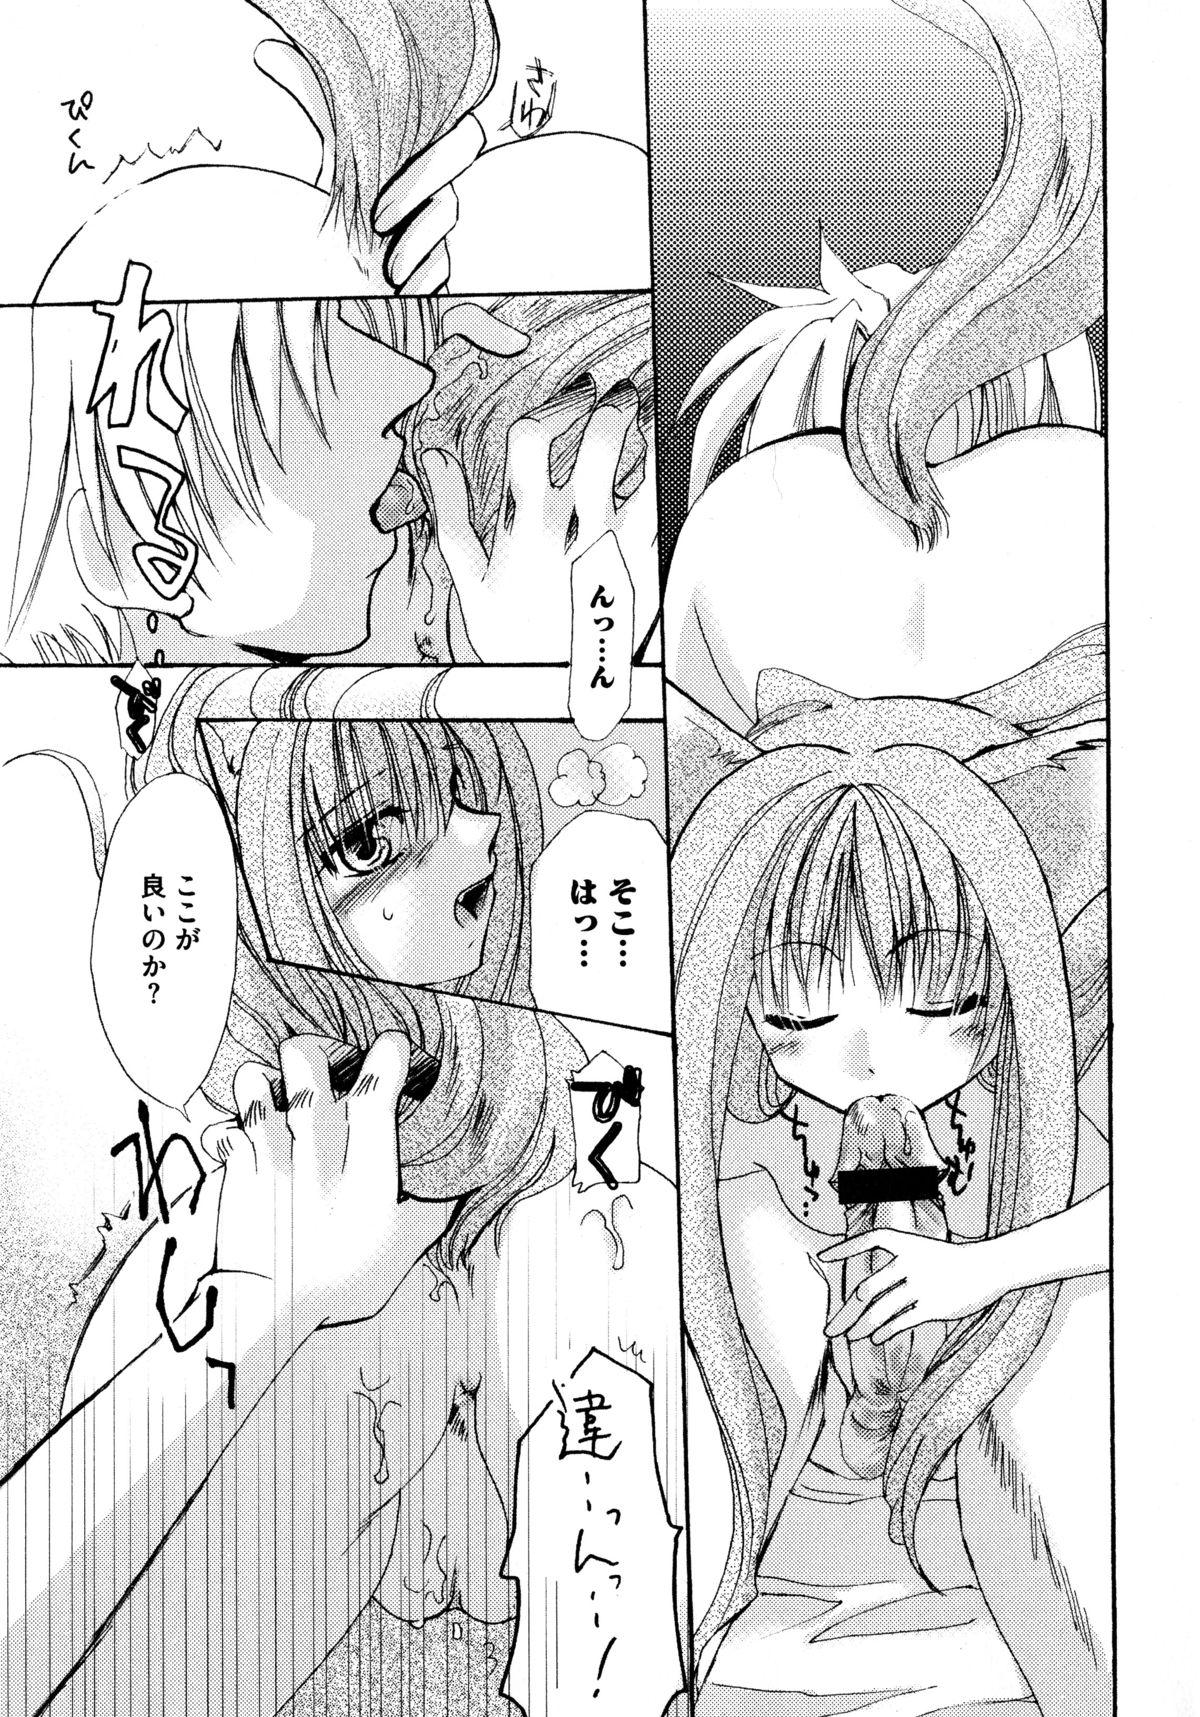 Collar Ookami Musume to Seikou Ookami Musume Eroparo Anthology - Spice and wolf Cum In Mouth - Page 12